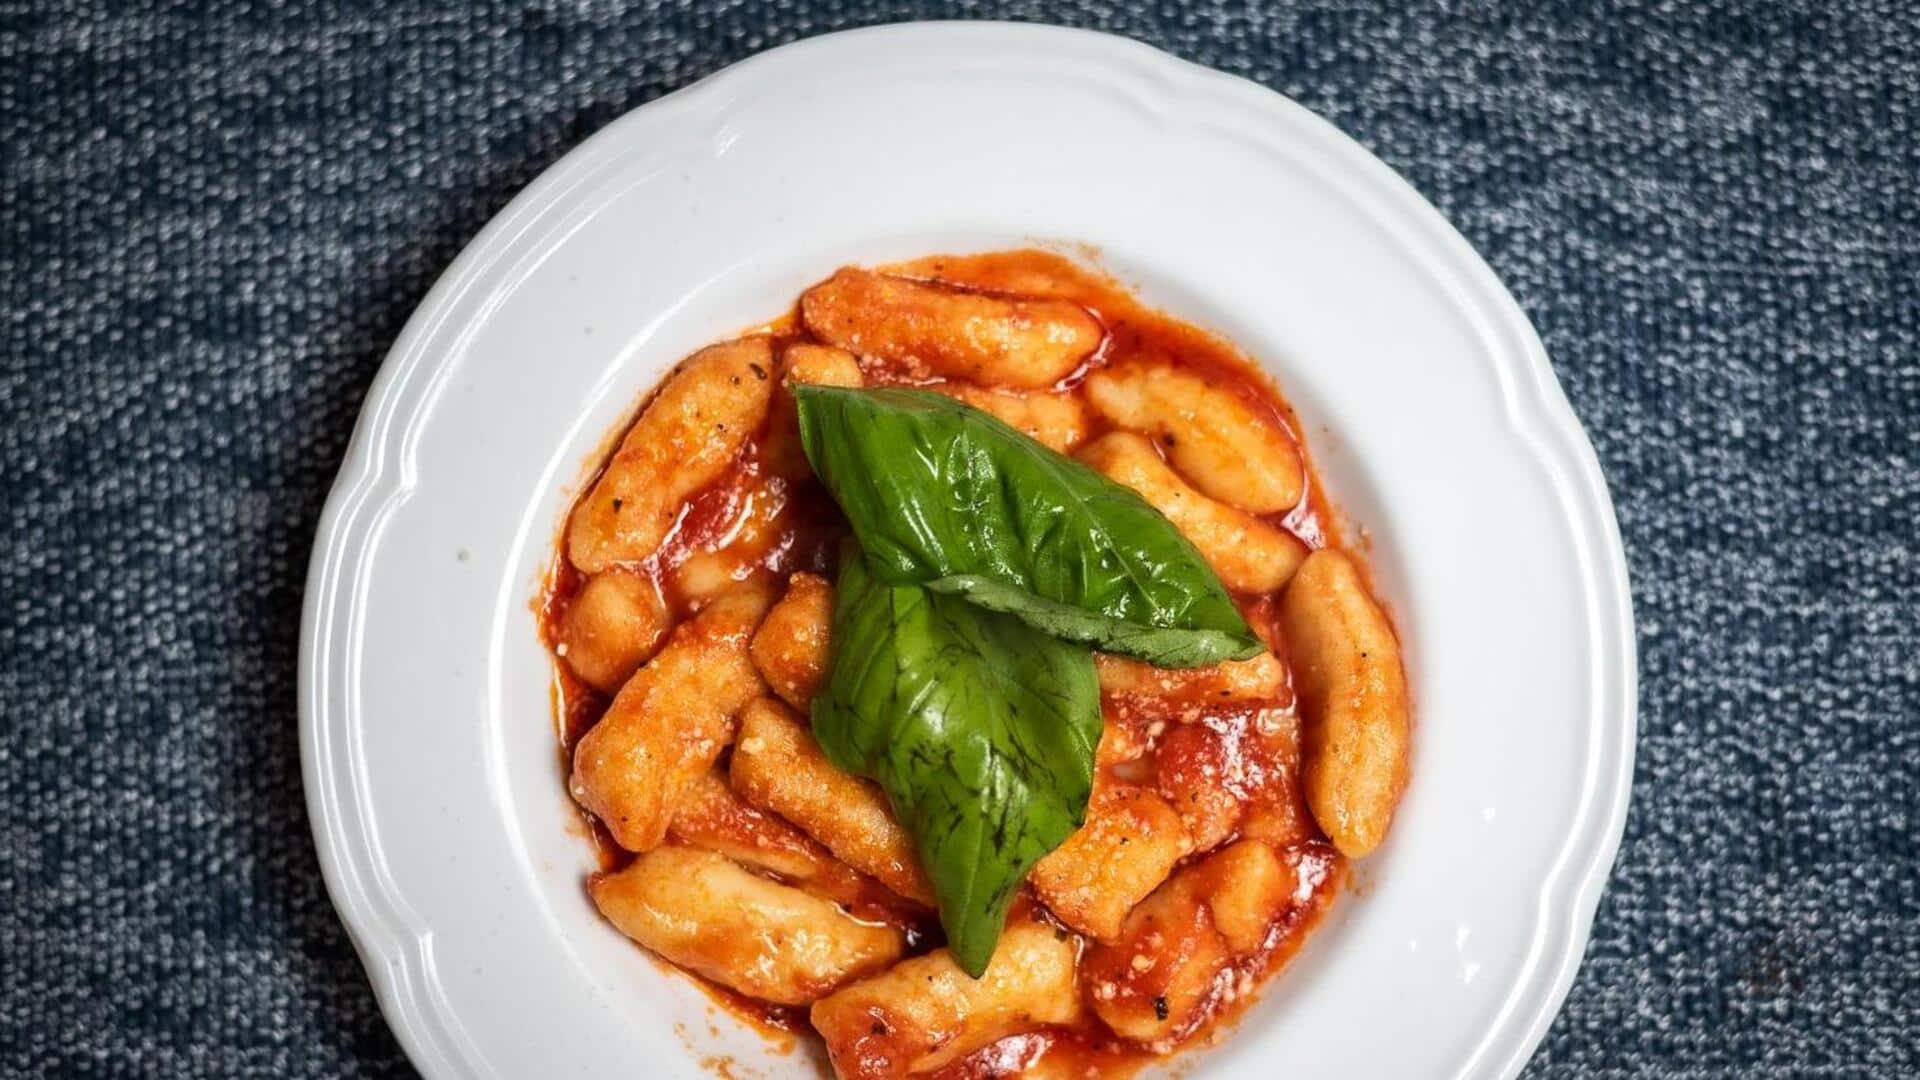 Check out this eggless Italian gnocchi recipe